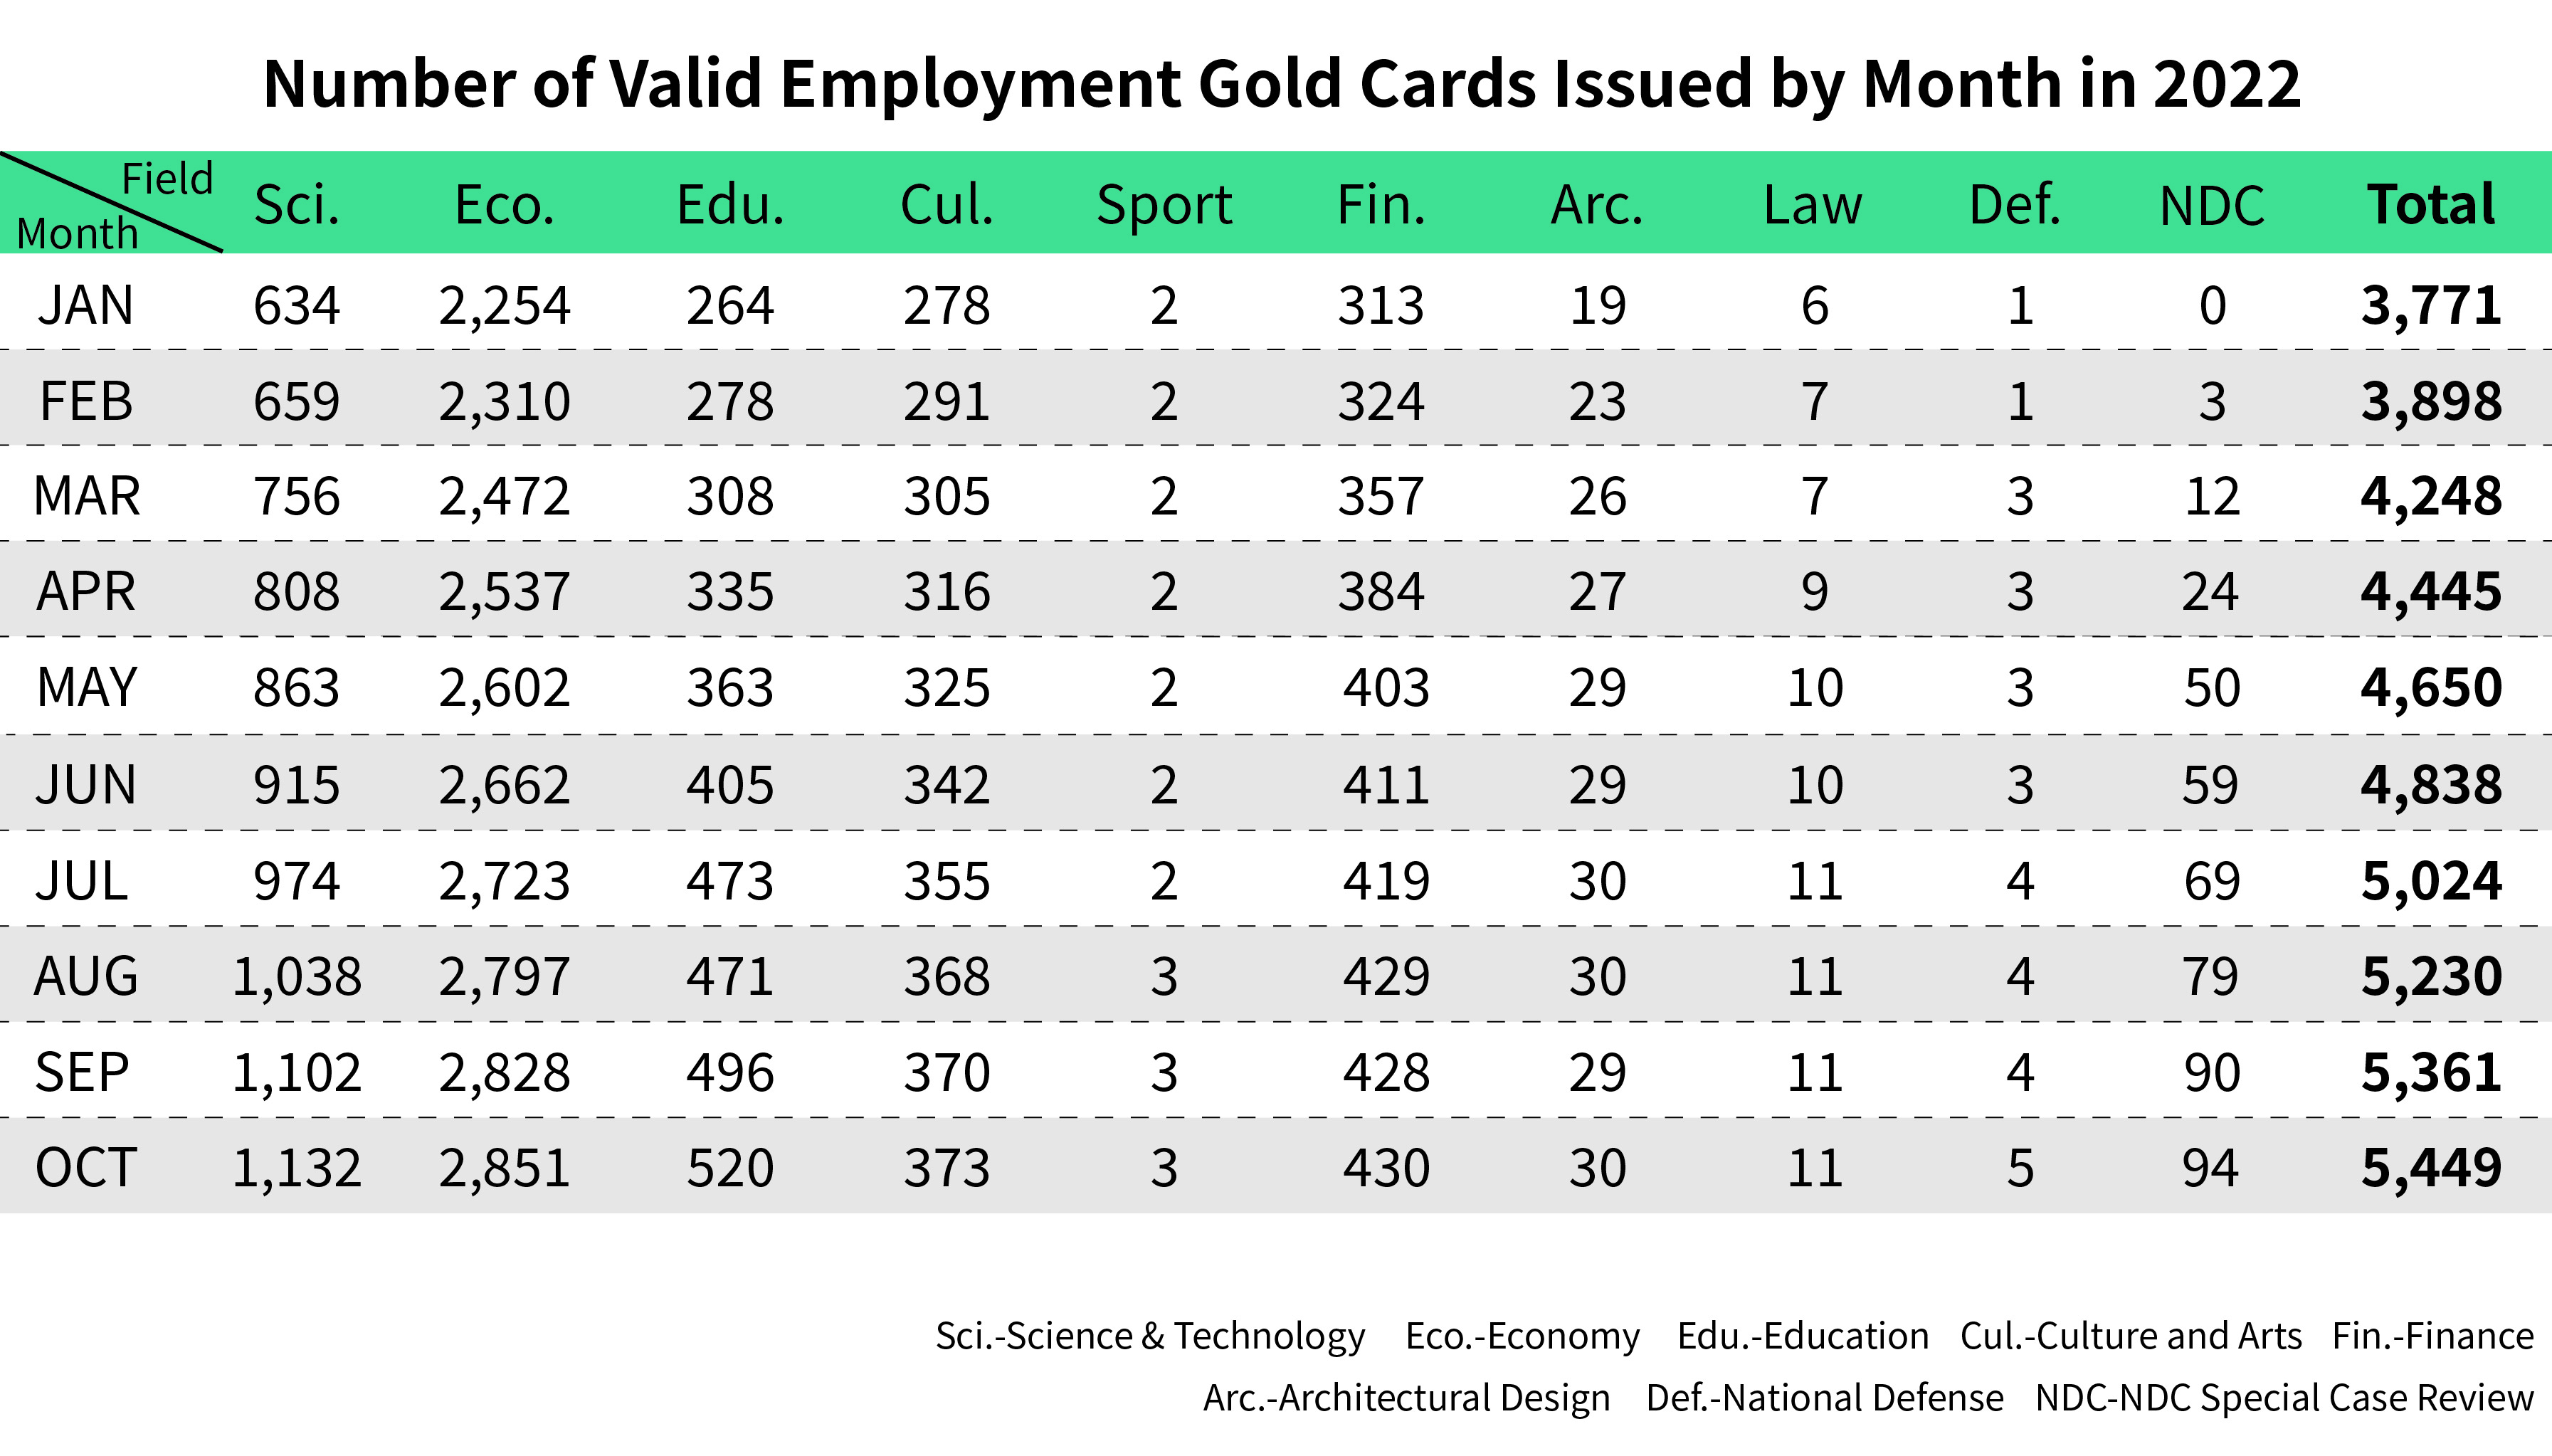 Number of Valid Employment Gold Cards Issued by Month-October